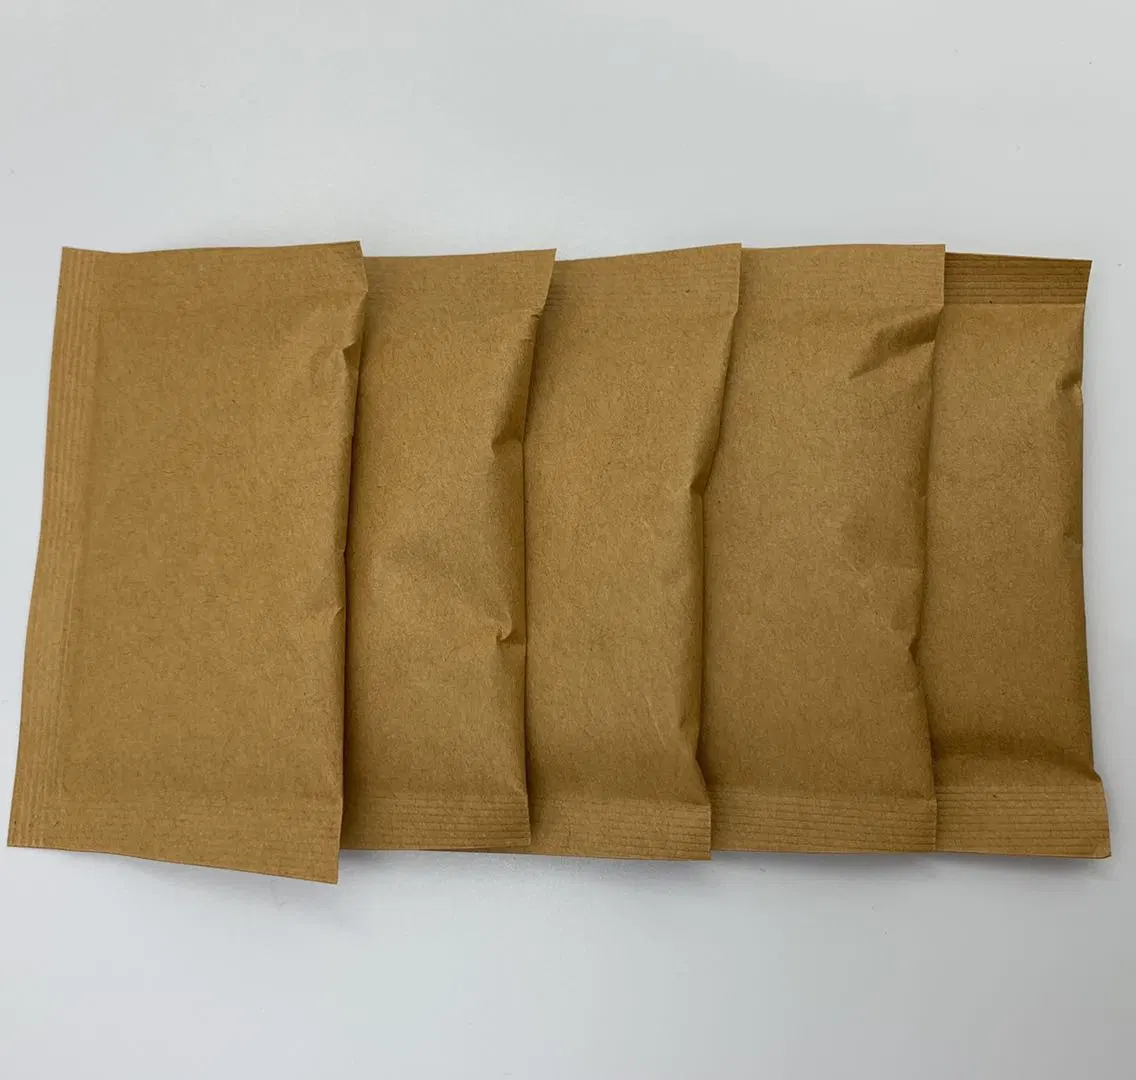 Vci Kraft Paper Reusable Calcium Chloride Clay Desiccant for Auto Spare Parts Anti-Rust Packaging